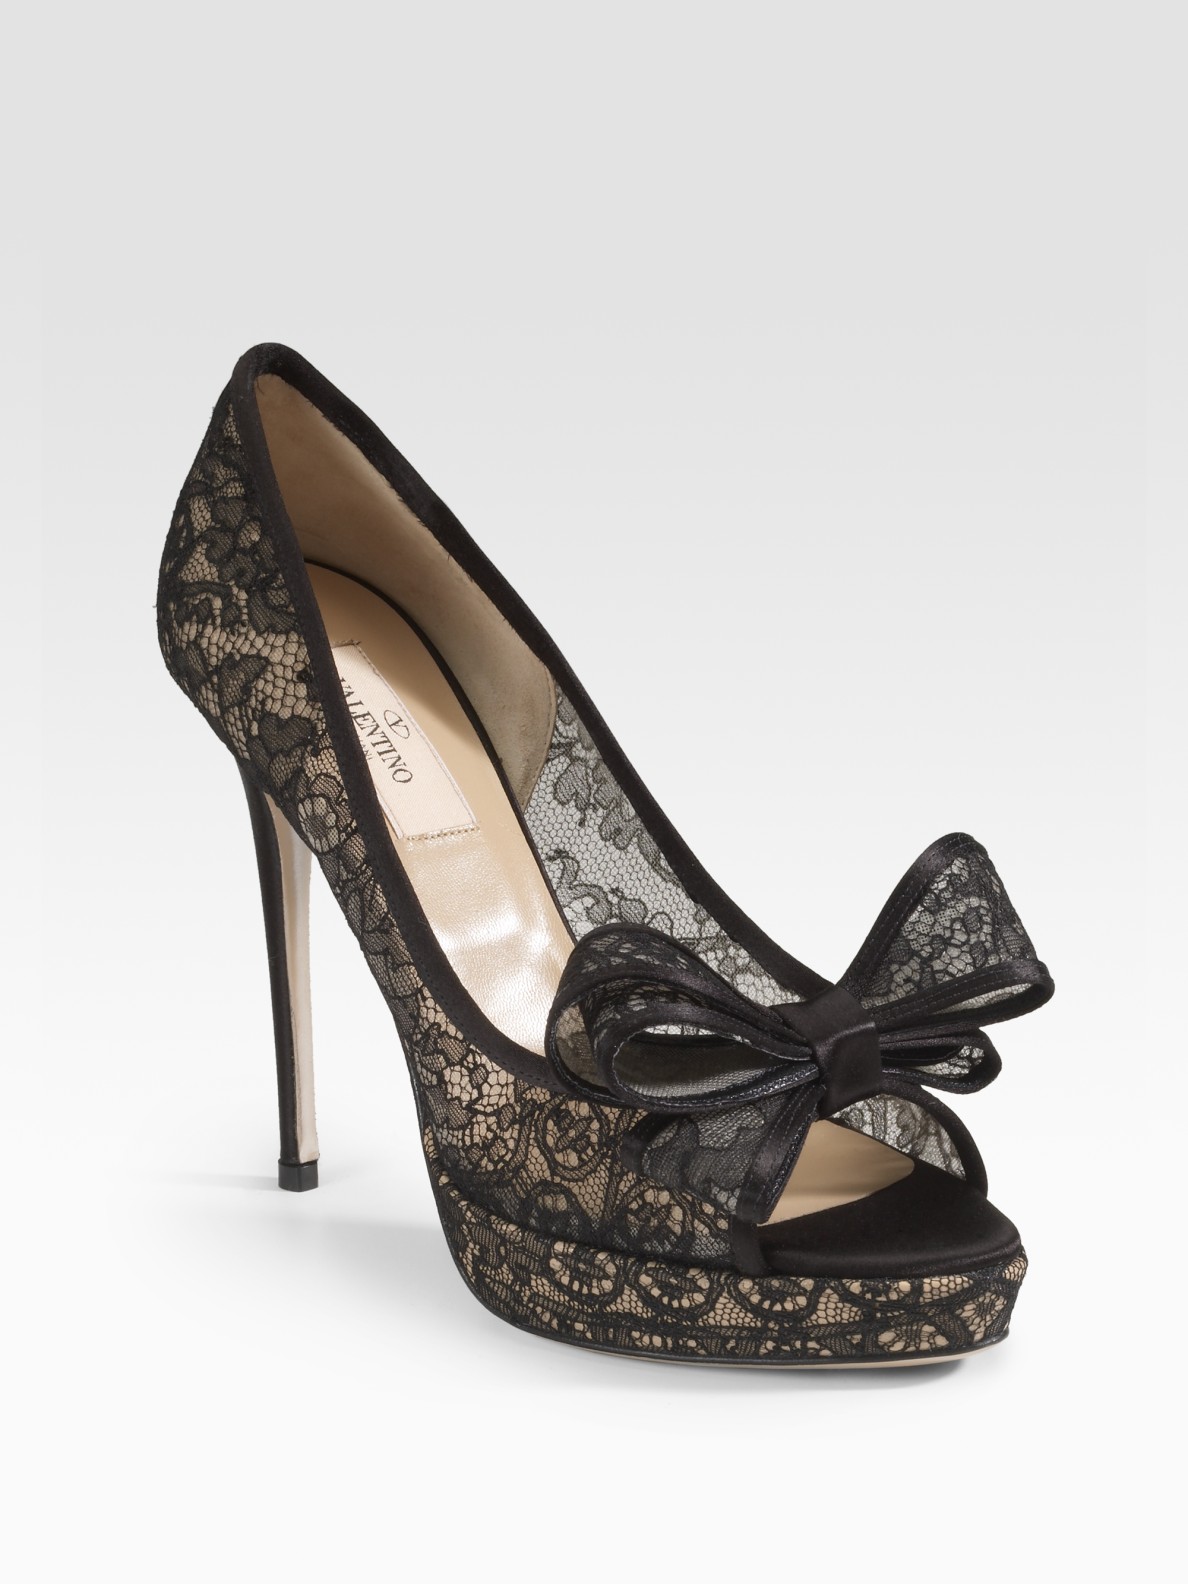 Lyst - Valentino Peep-toe Lace Pumps in Black